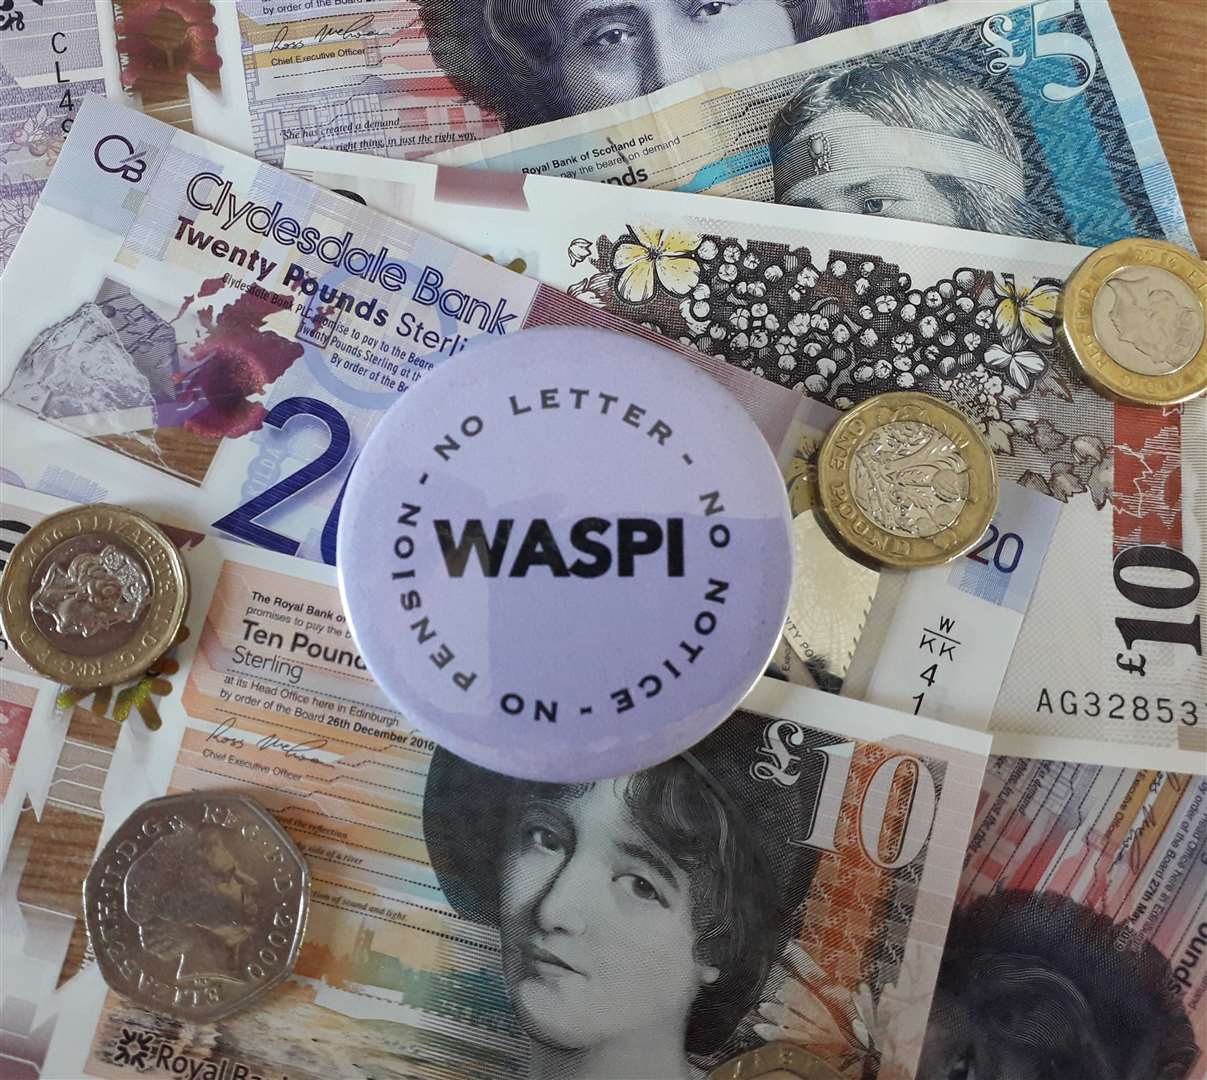 WASPI is campaigning to achieve fair transitional pension arrangements for women.